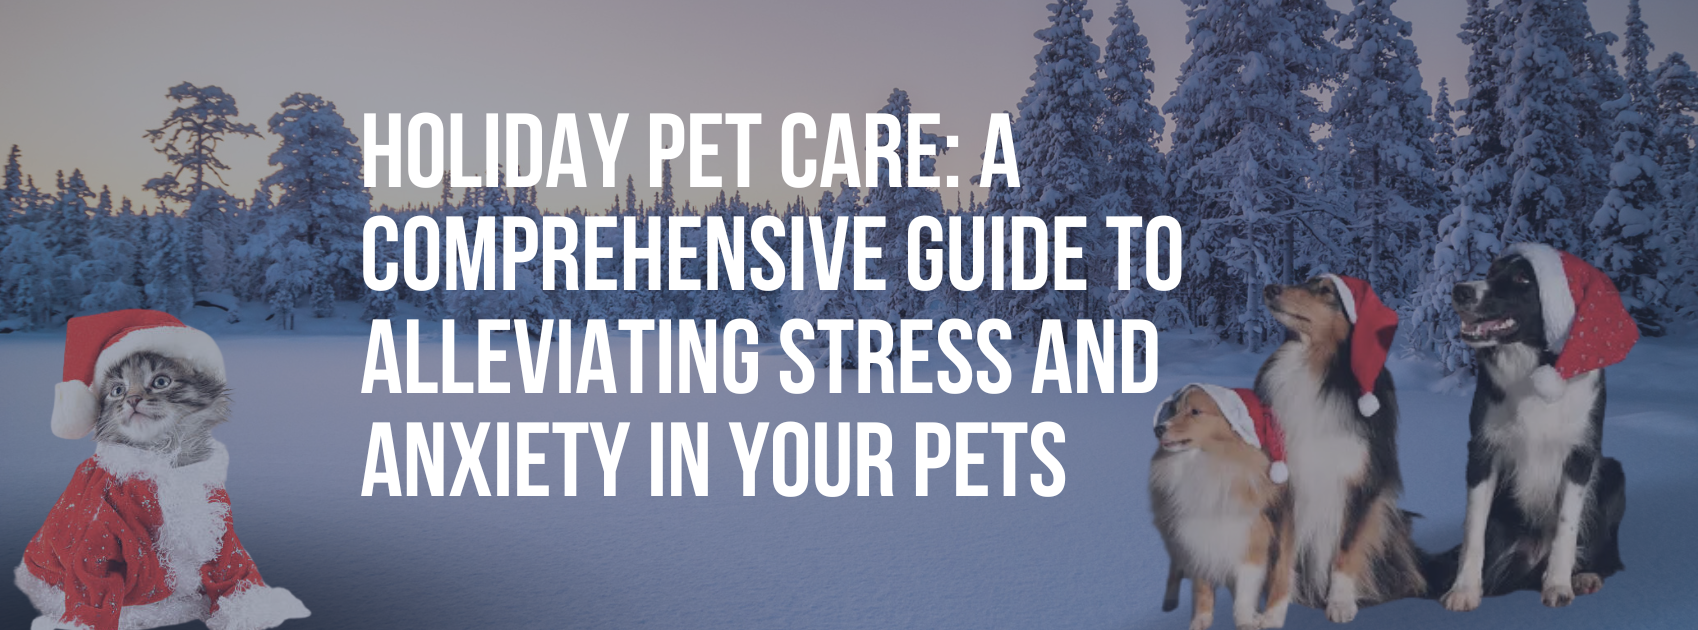 Holiday Pet Care: A Comprehensive Guide to Alleviating Stress and Anxiety in Your Pets